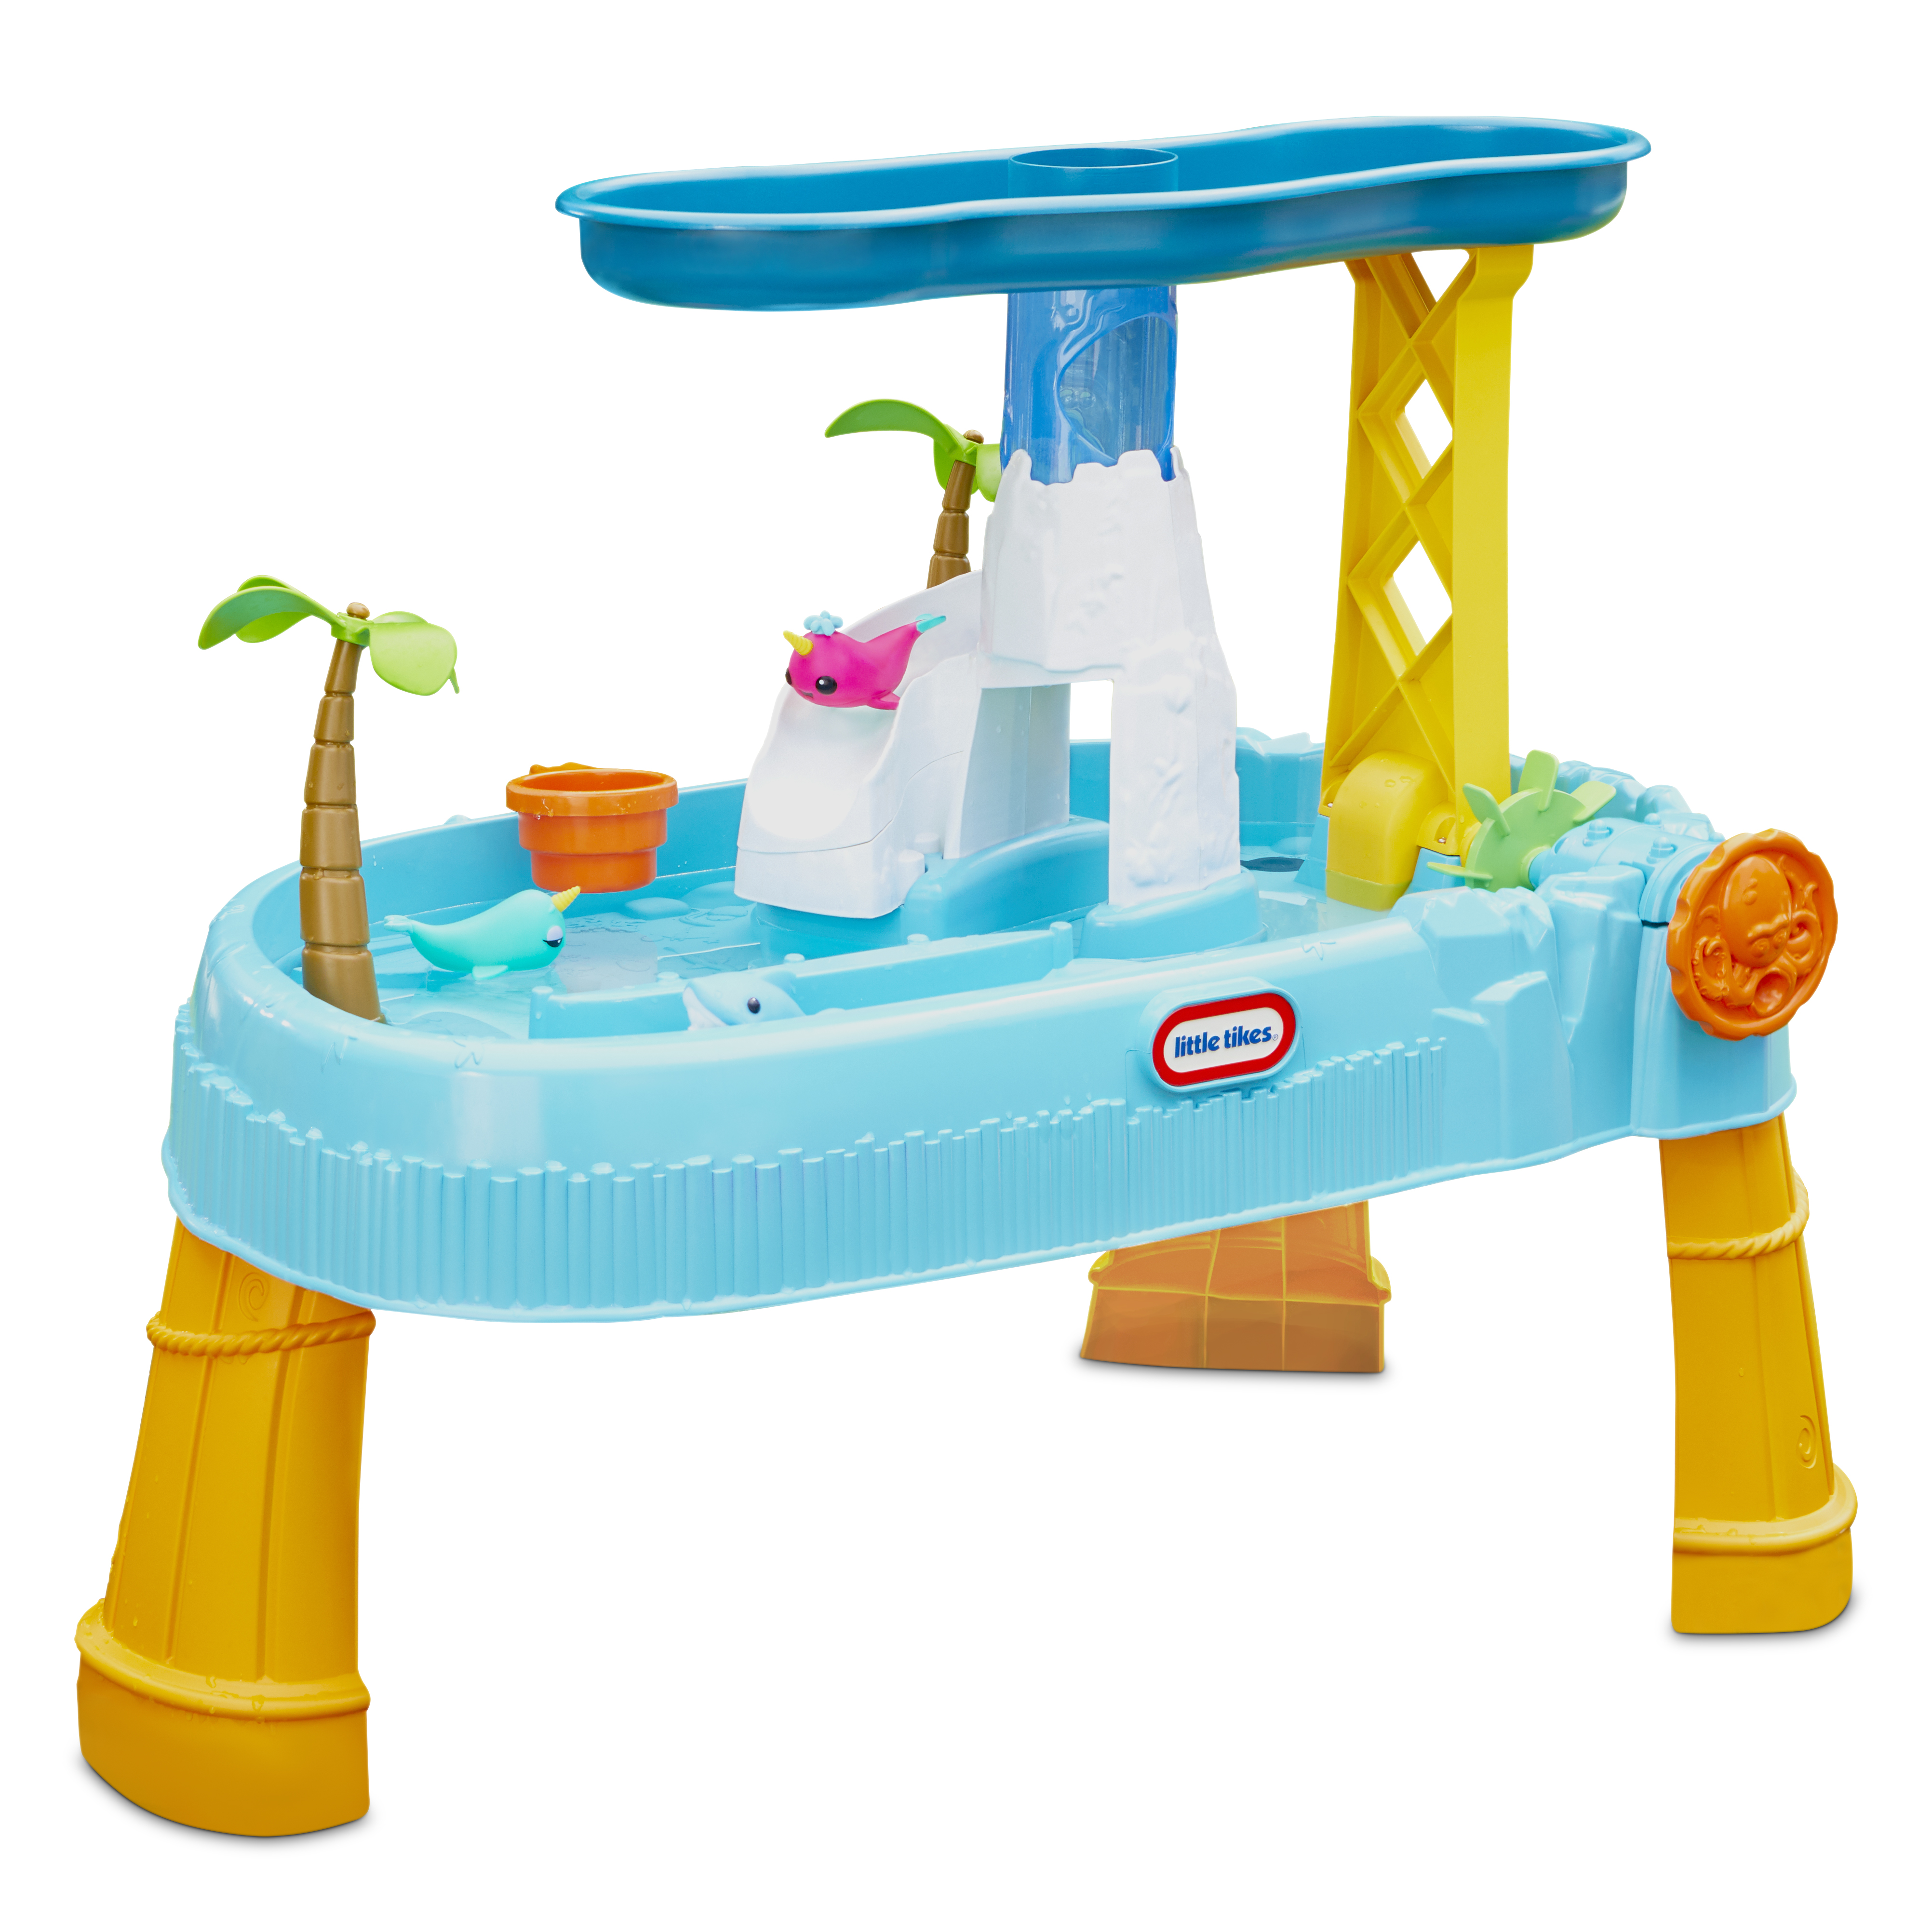 Little Tikes® Waterfall Island™ Water Activity Table with Accessories, for Kids ages 2-5 years - image 1 of 8